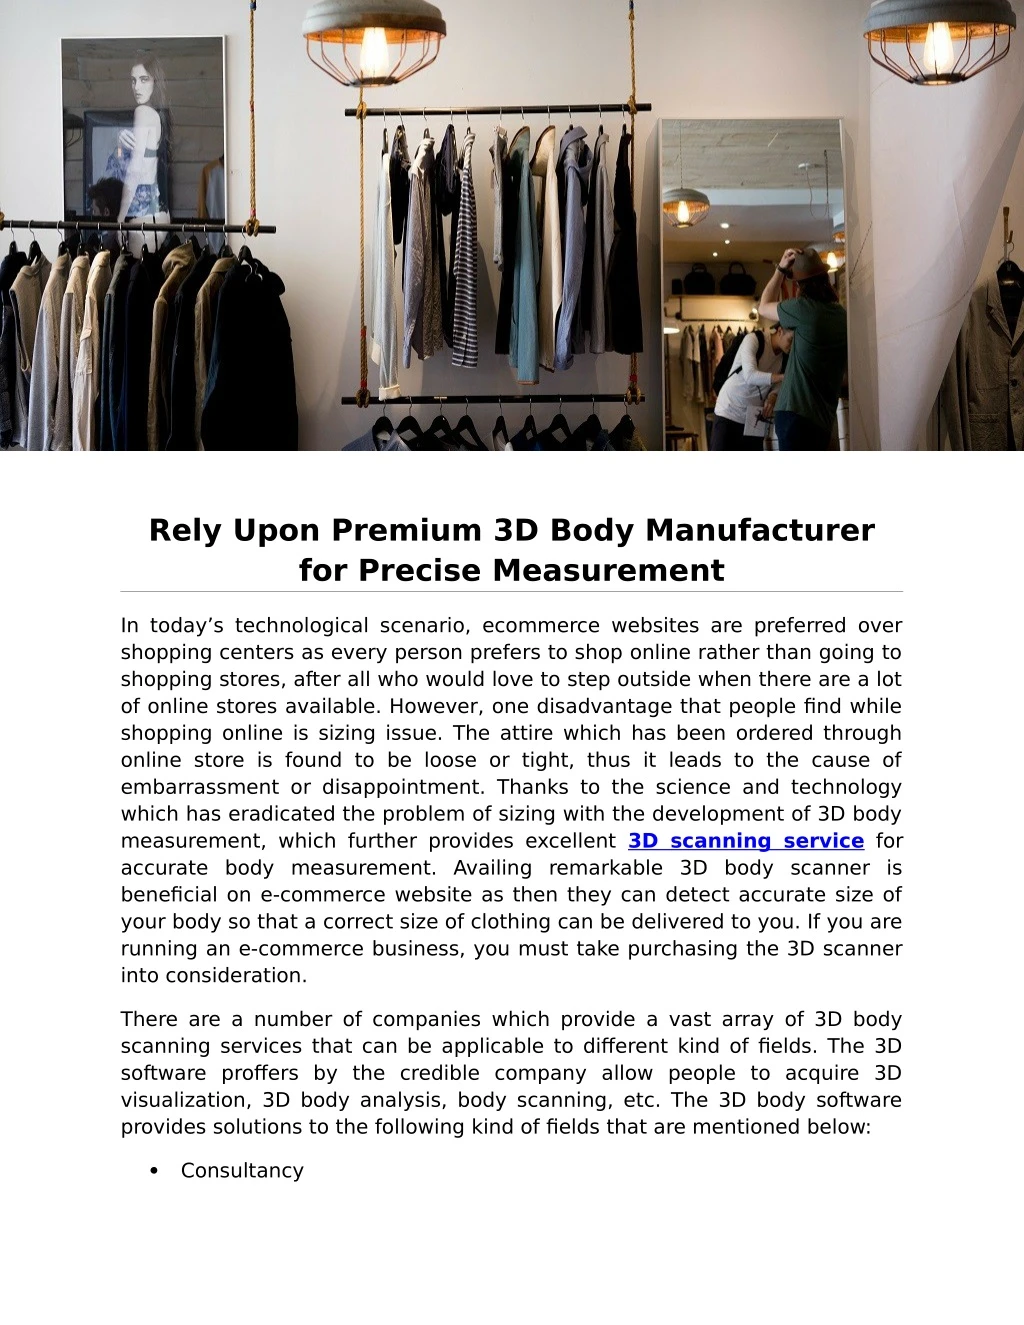 rely upon premium 3d body manufacturer